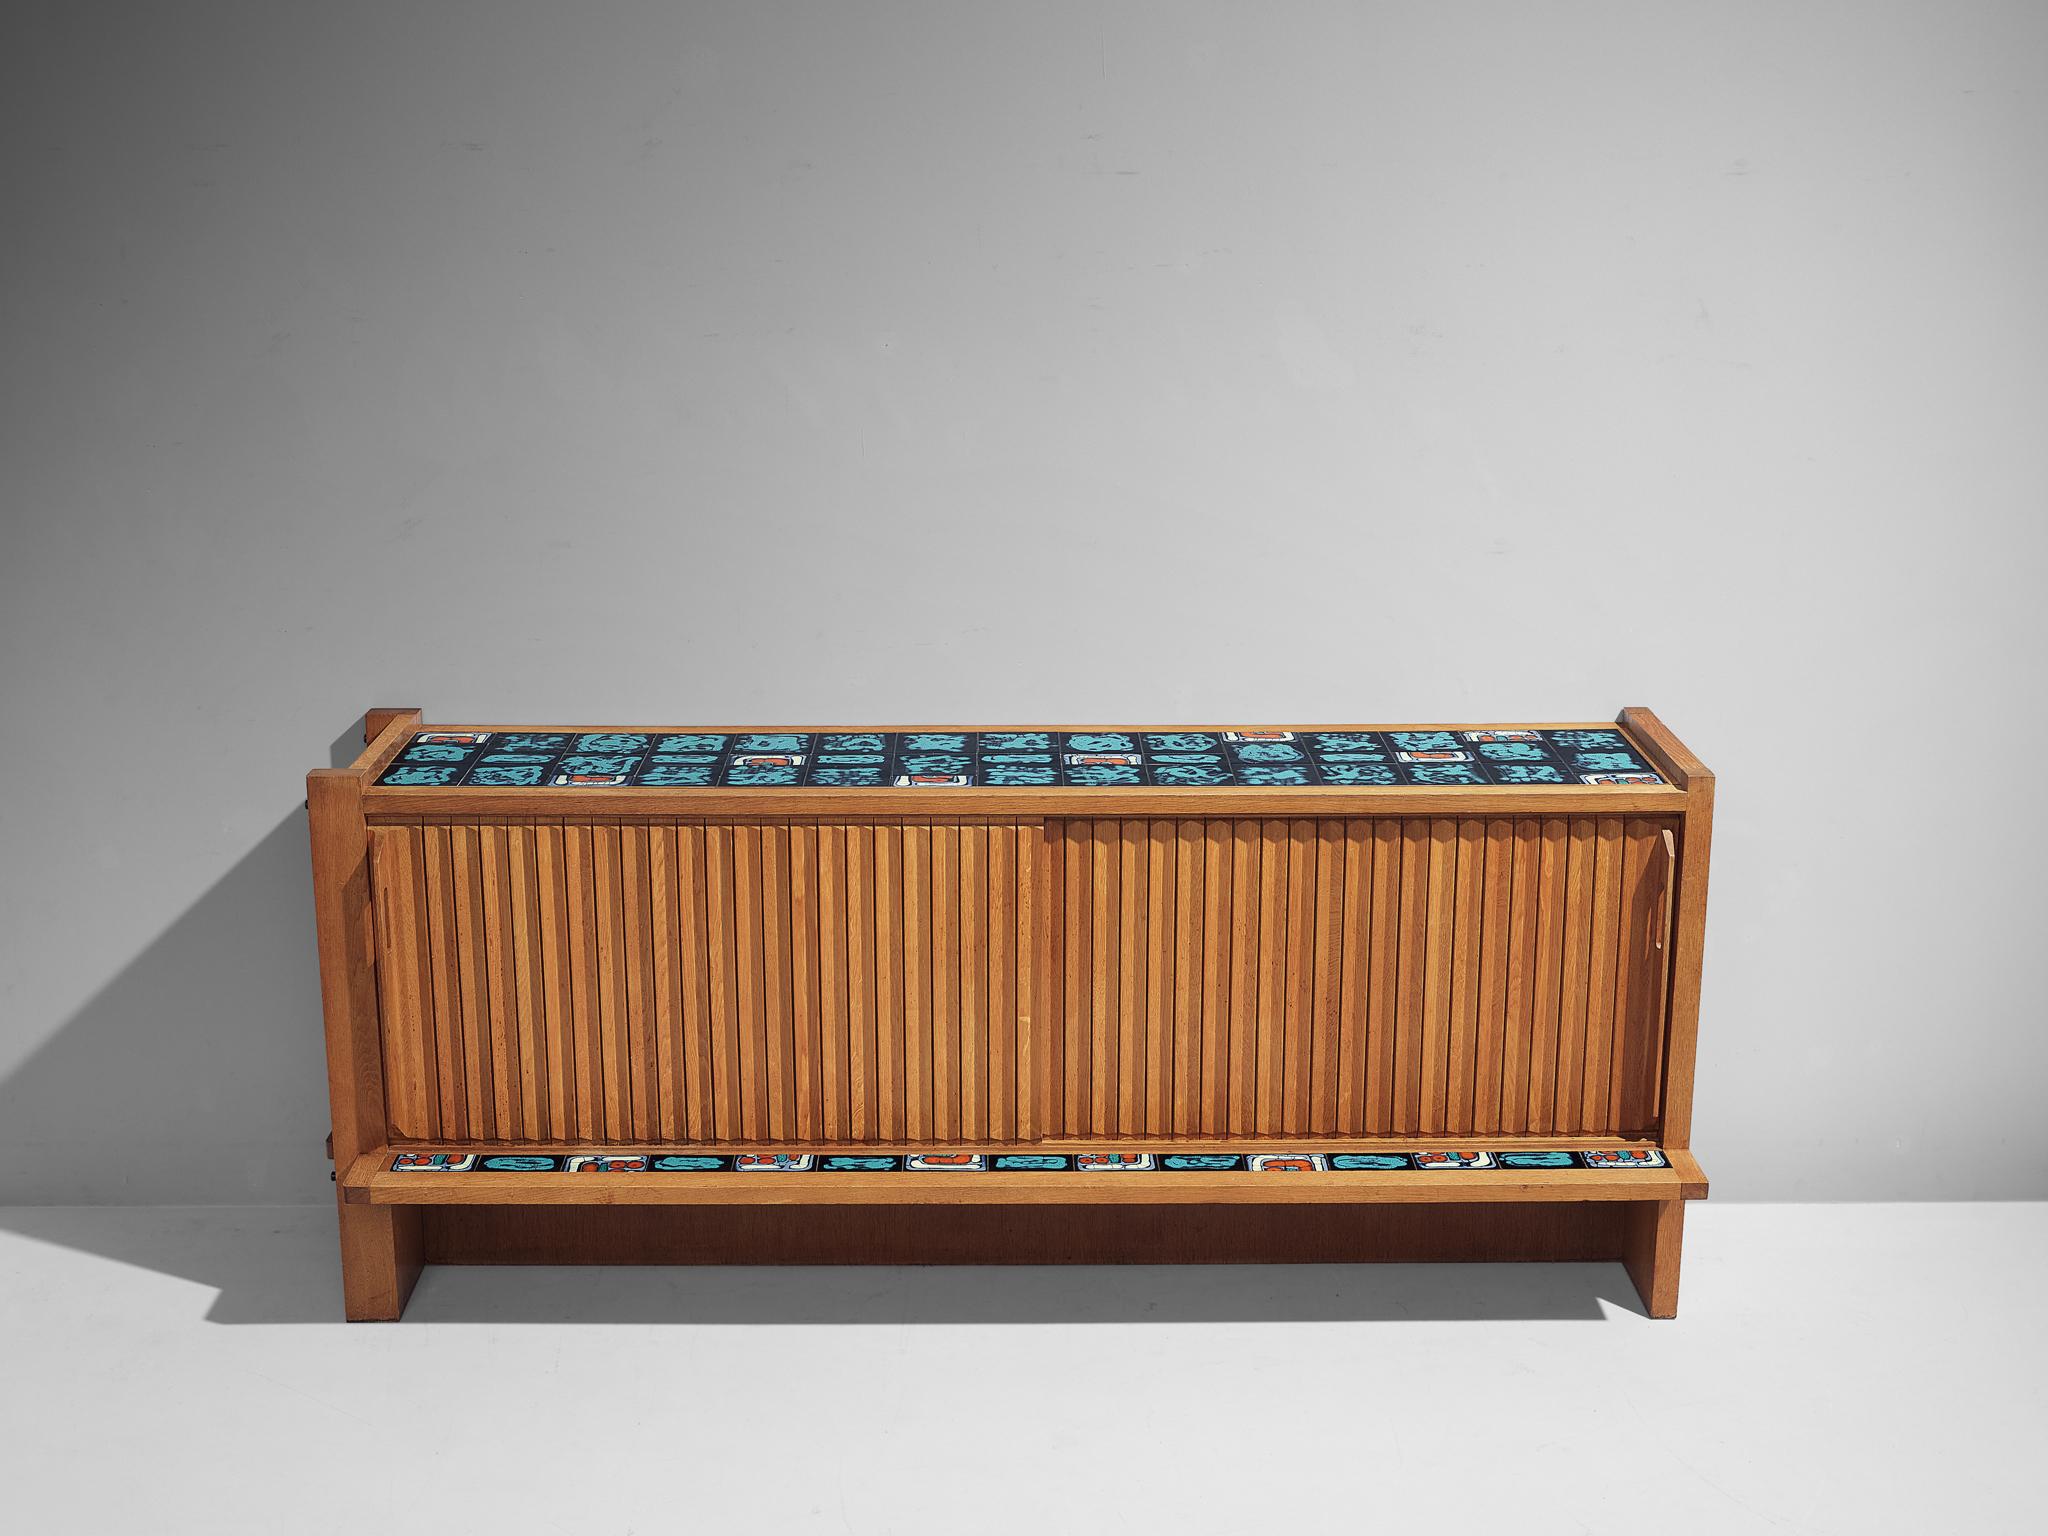 Guillerme et Chambron Sideboard in Solid Oak with Turquoise Ceramic Tiles 2